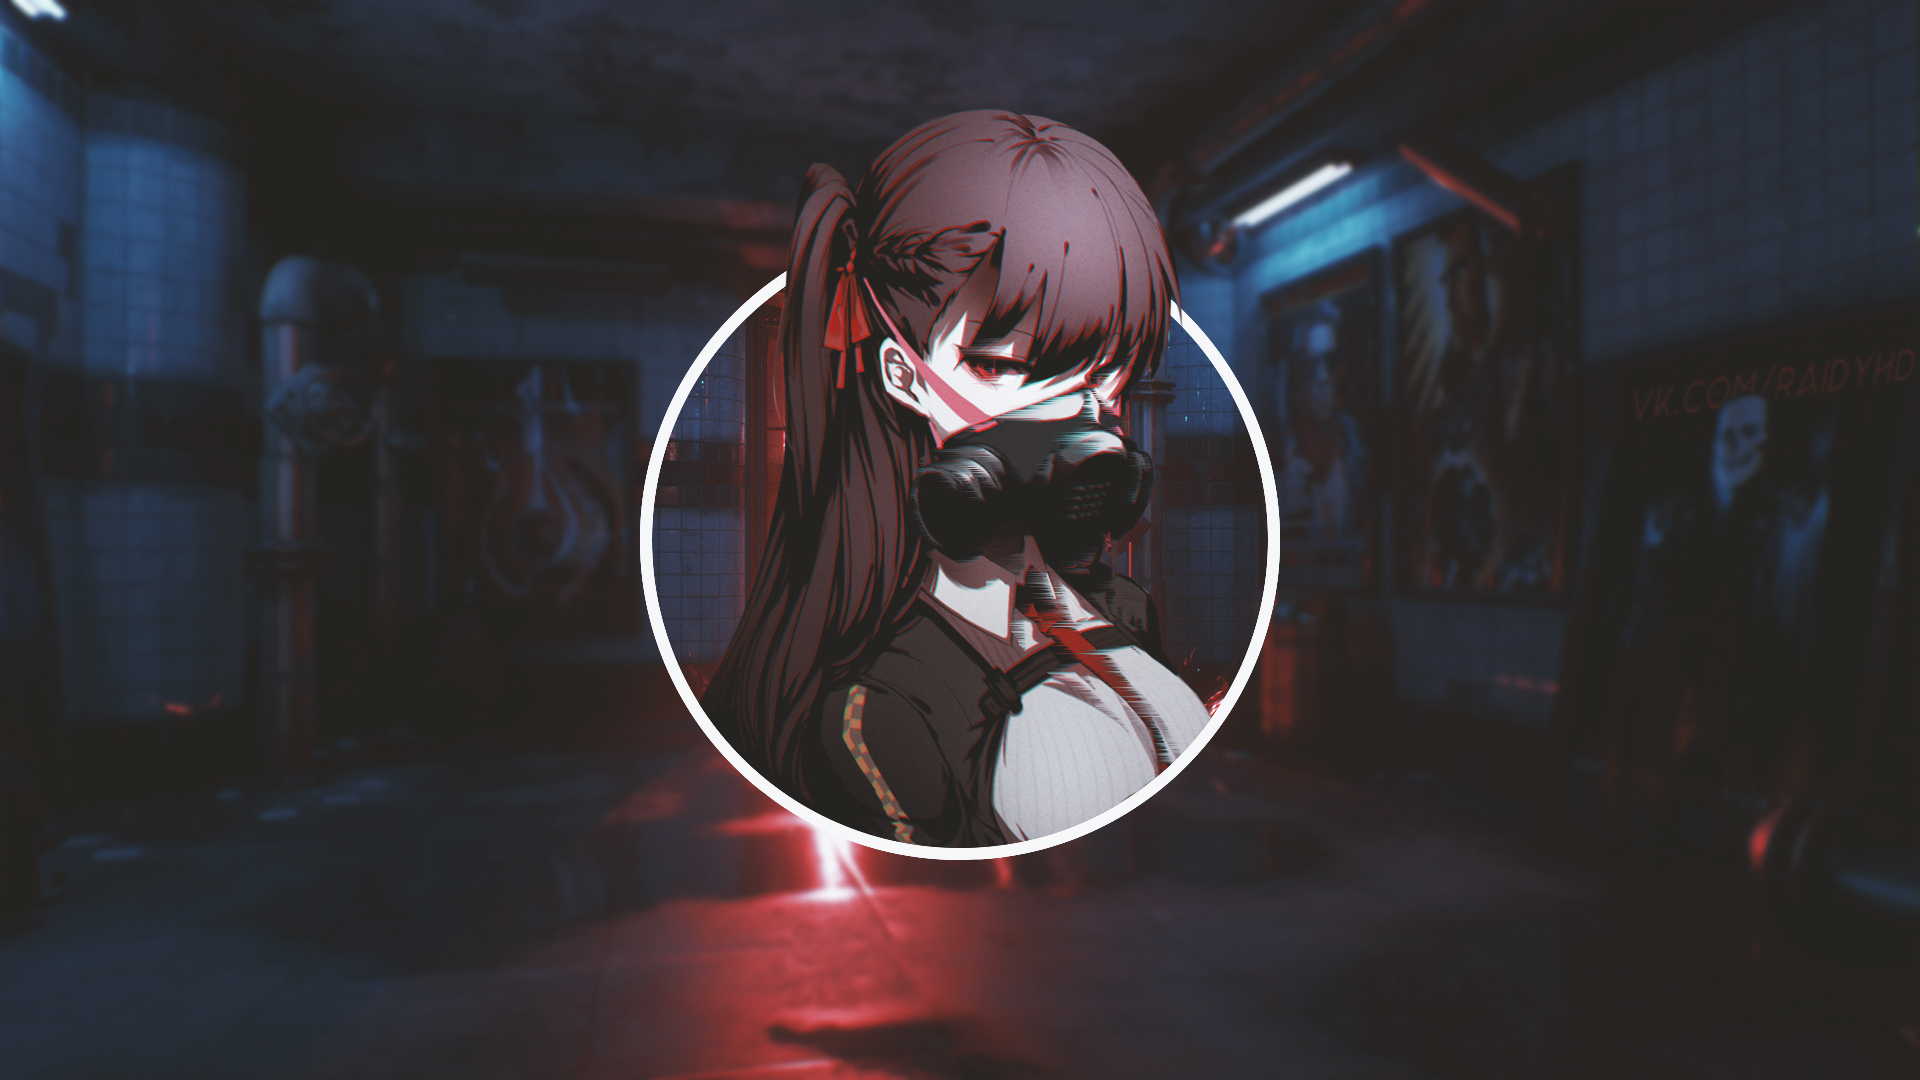 Picture In Picture Gas Mask Wa2000 Girls Frontline 1920x1080